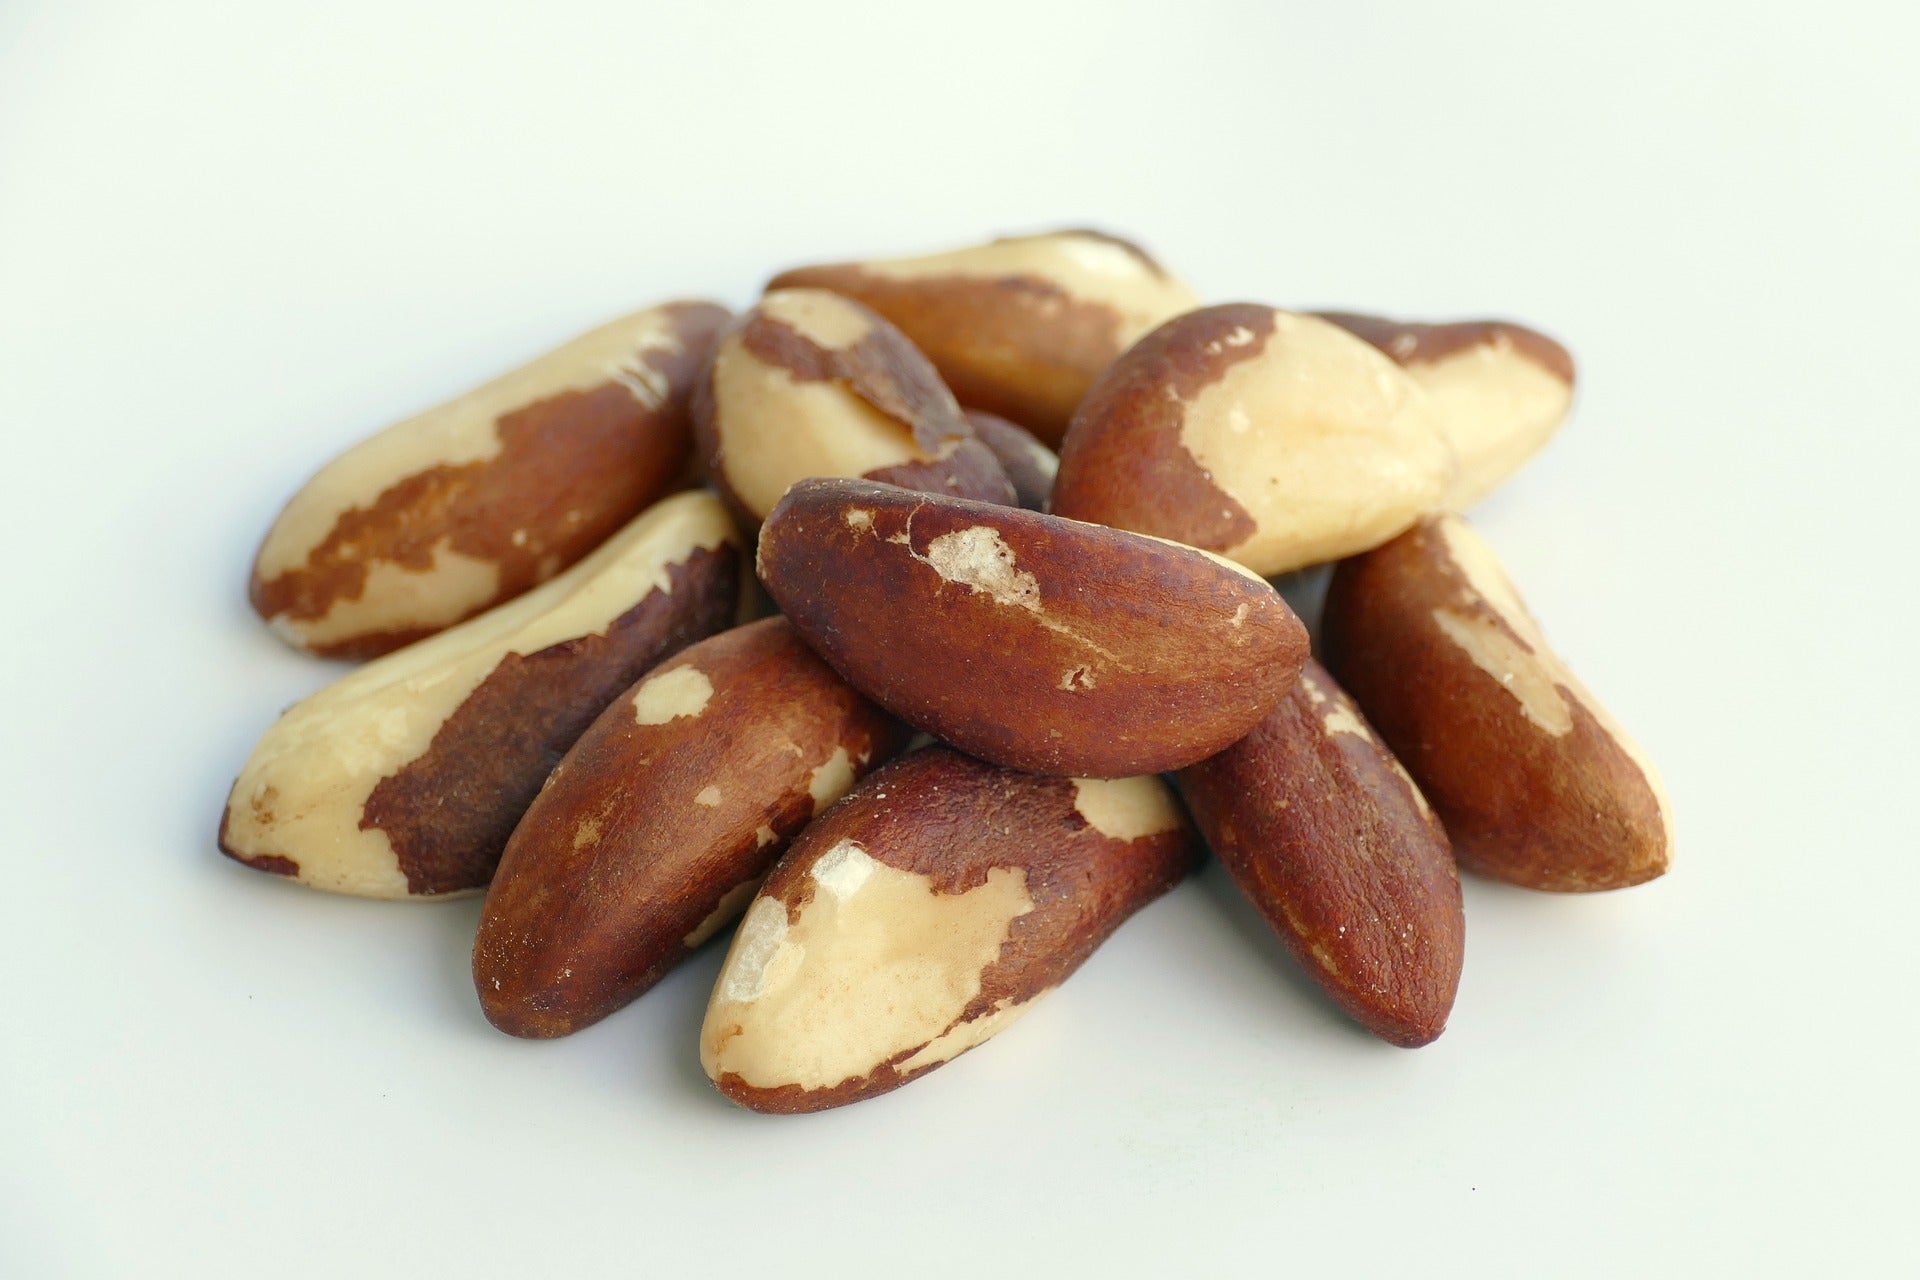 Brazil Nuts: The One Snack You Should Be Eating Every Day